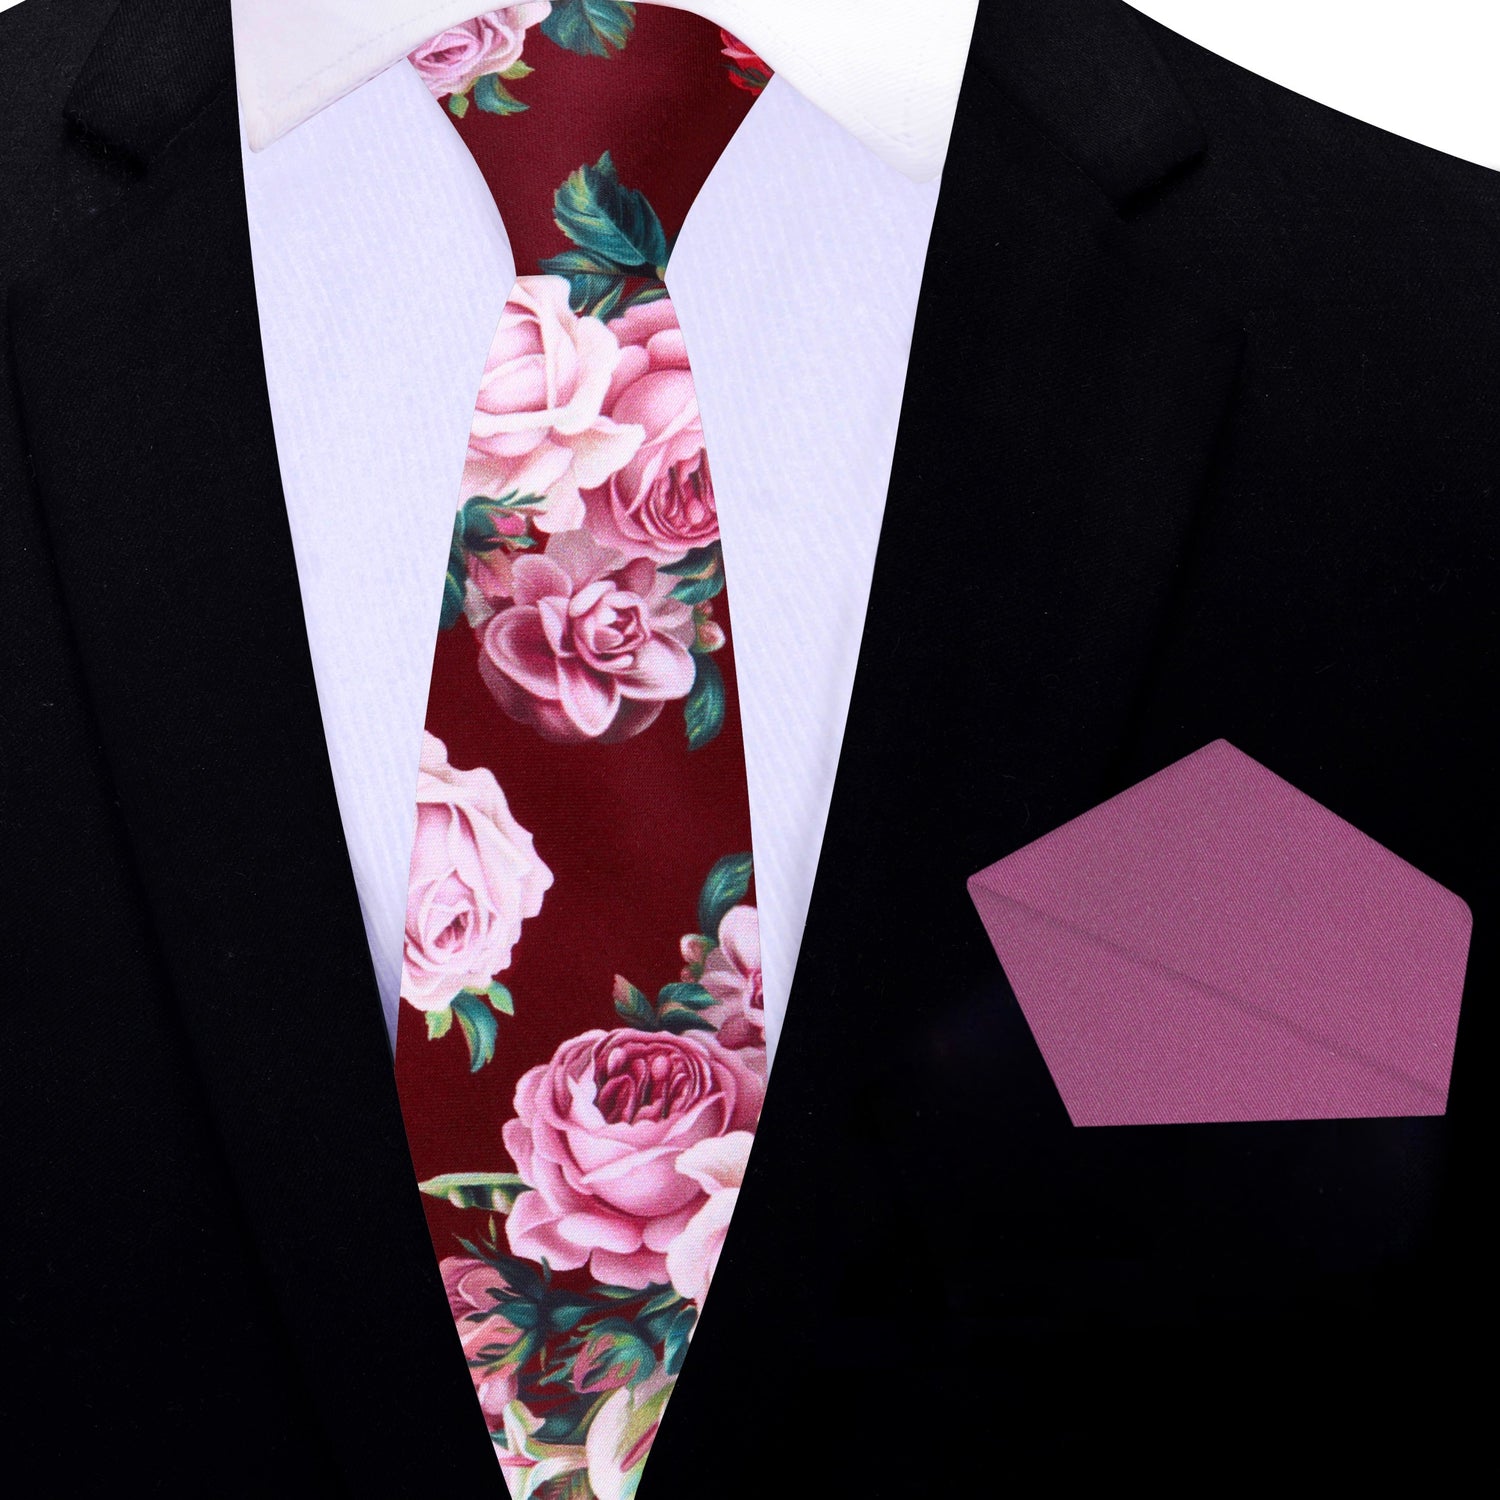 Thin Tie: Deep Red Wine Vase of Flowers Tie and Accenting PocketSquare12